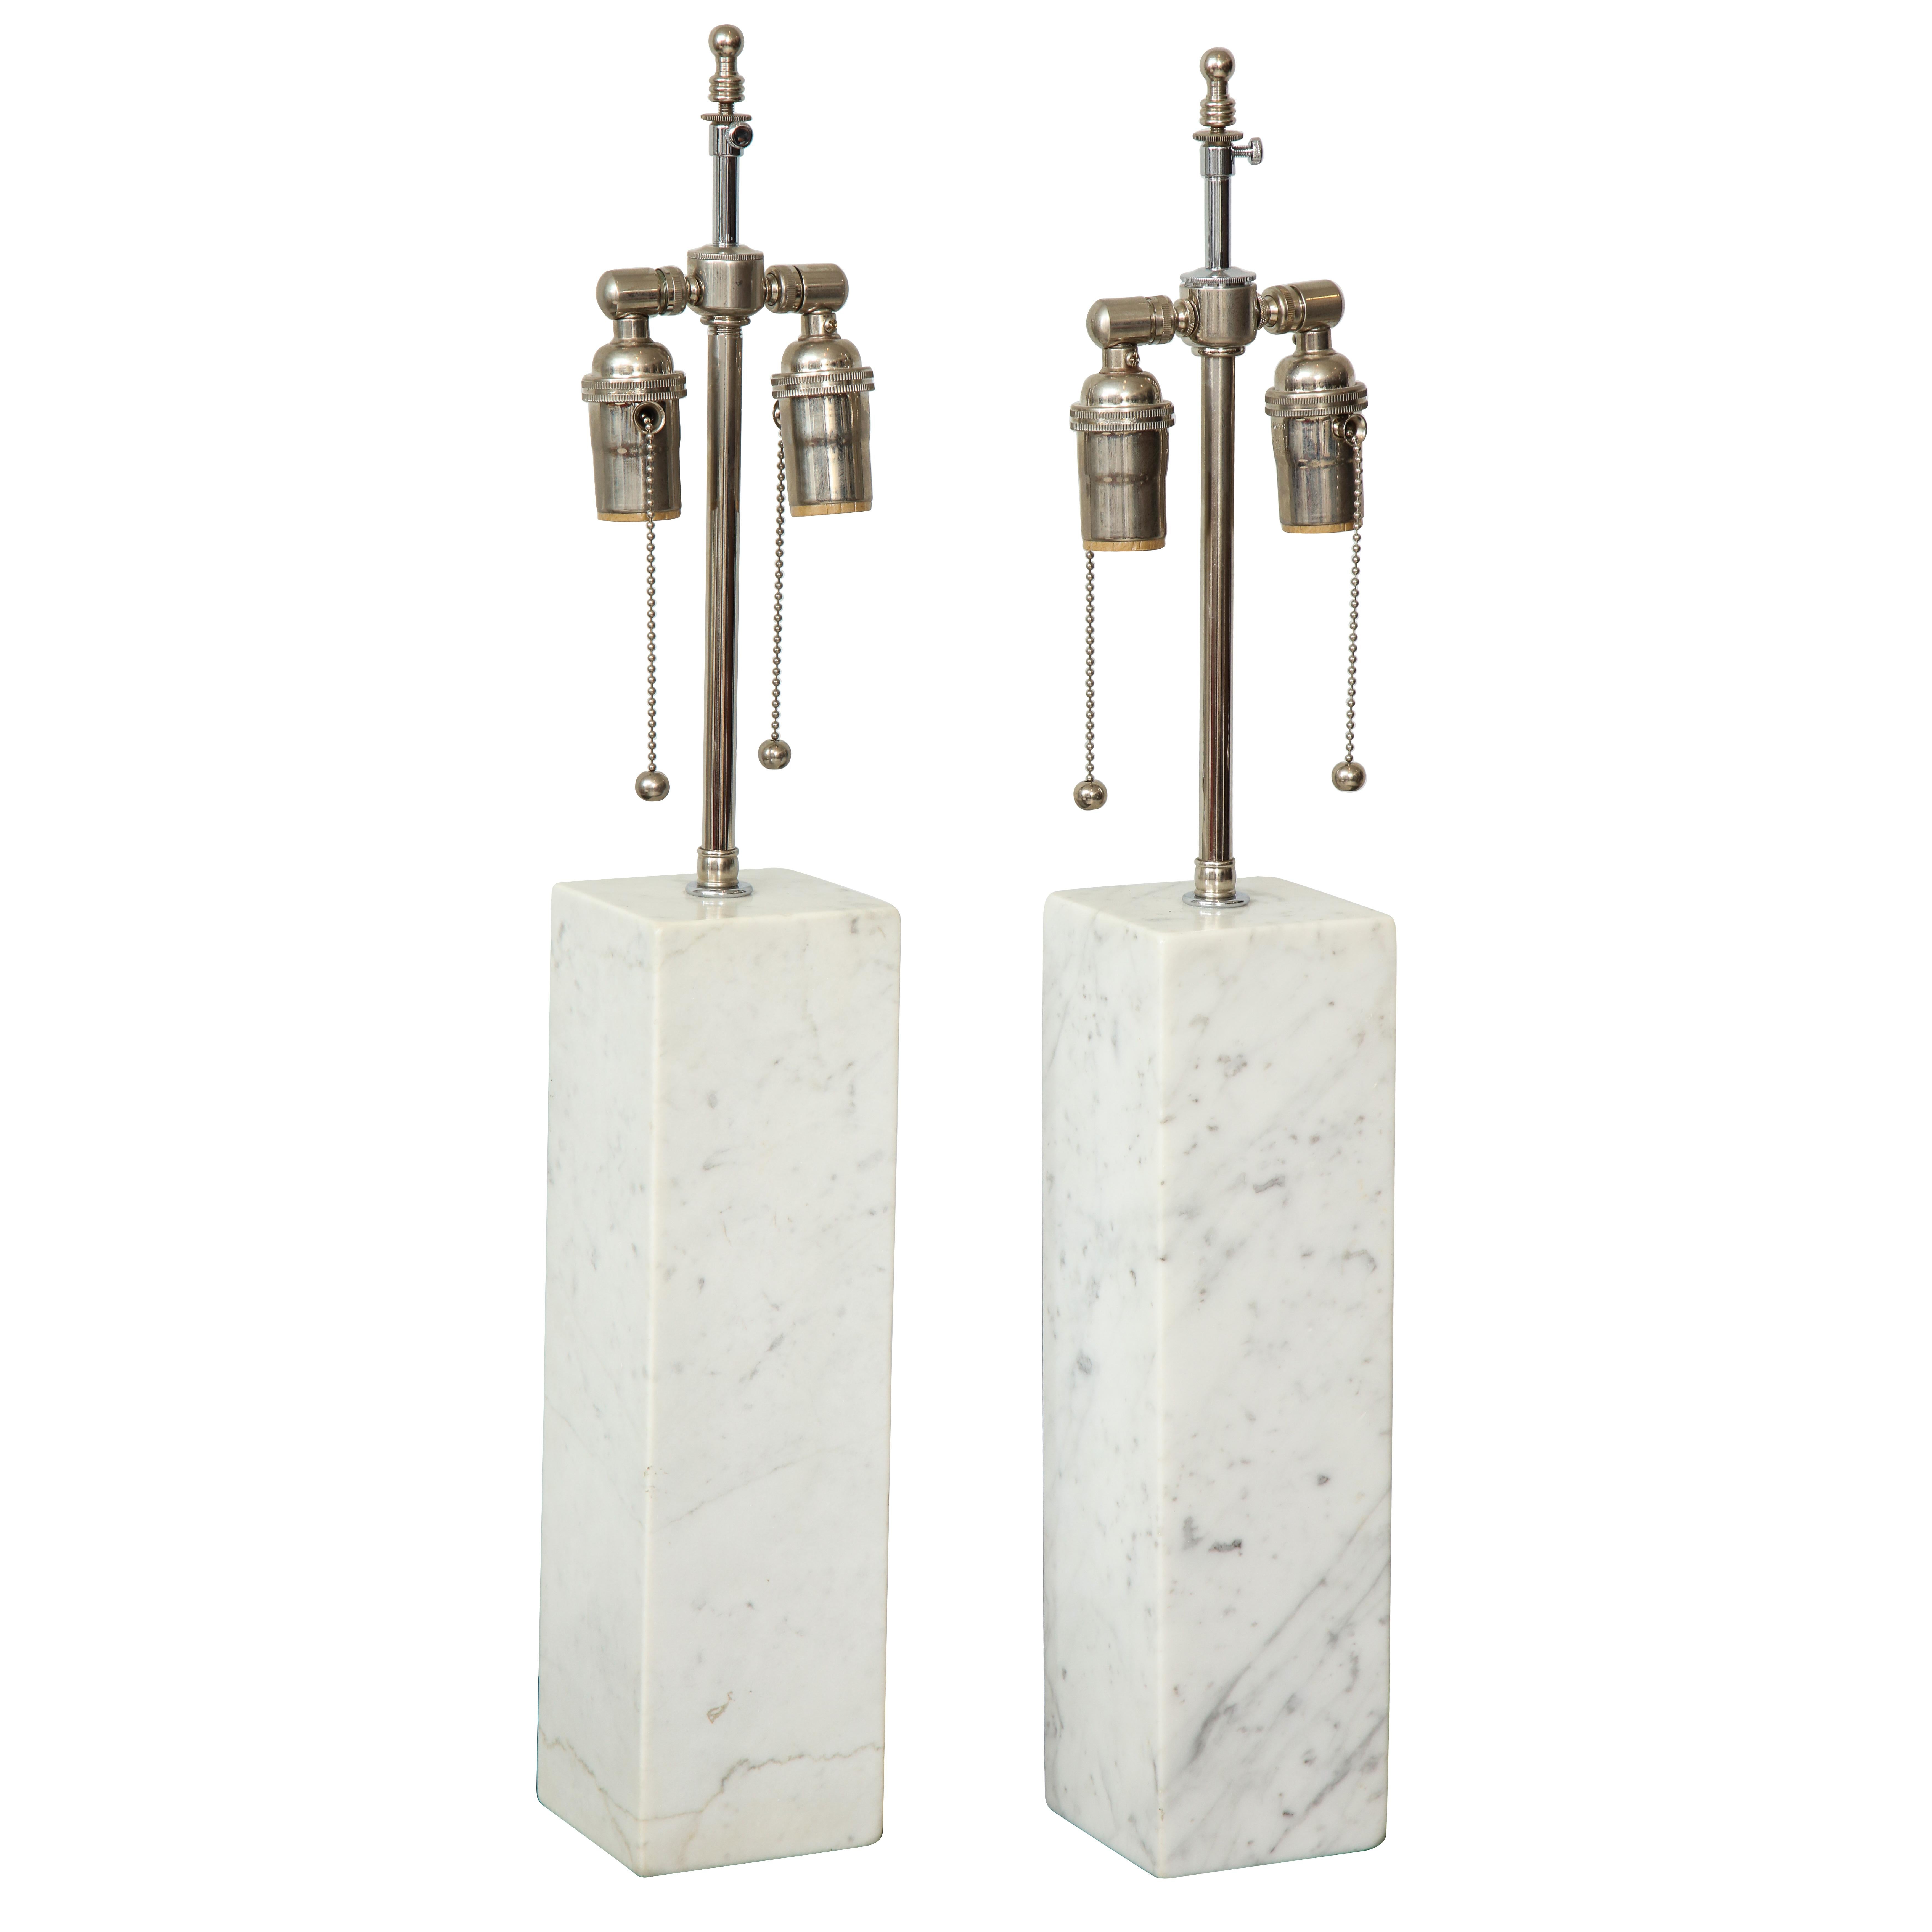 Pair of sculptural vintage Calacatta marble lamps.
Measures: Height to clusters 26 3/4, height to base of lamps 14.